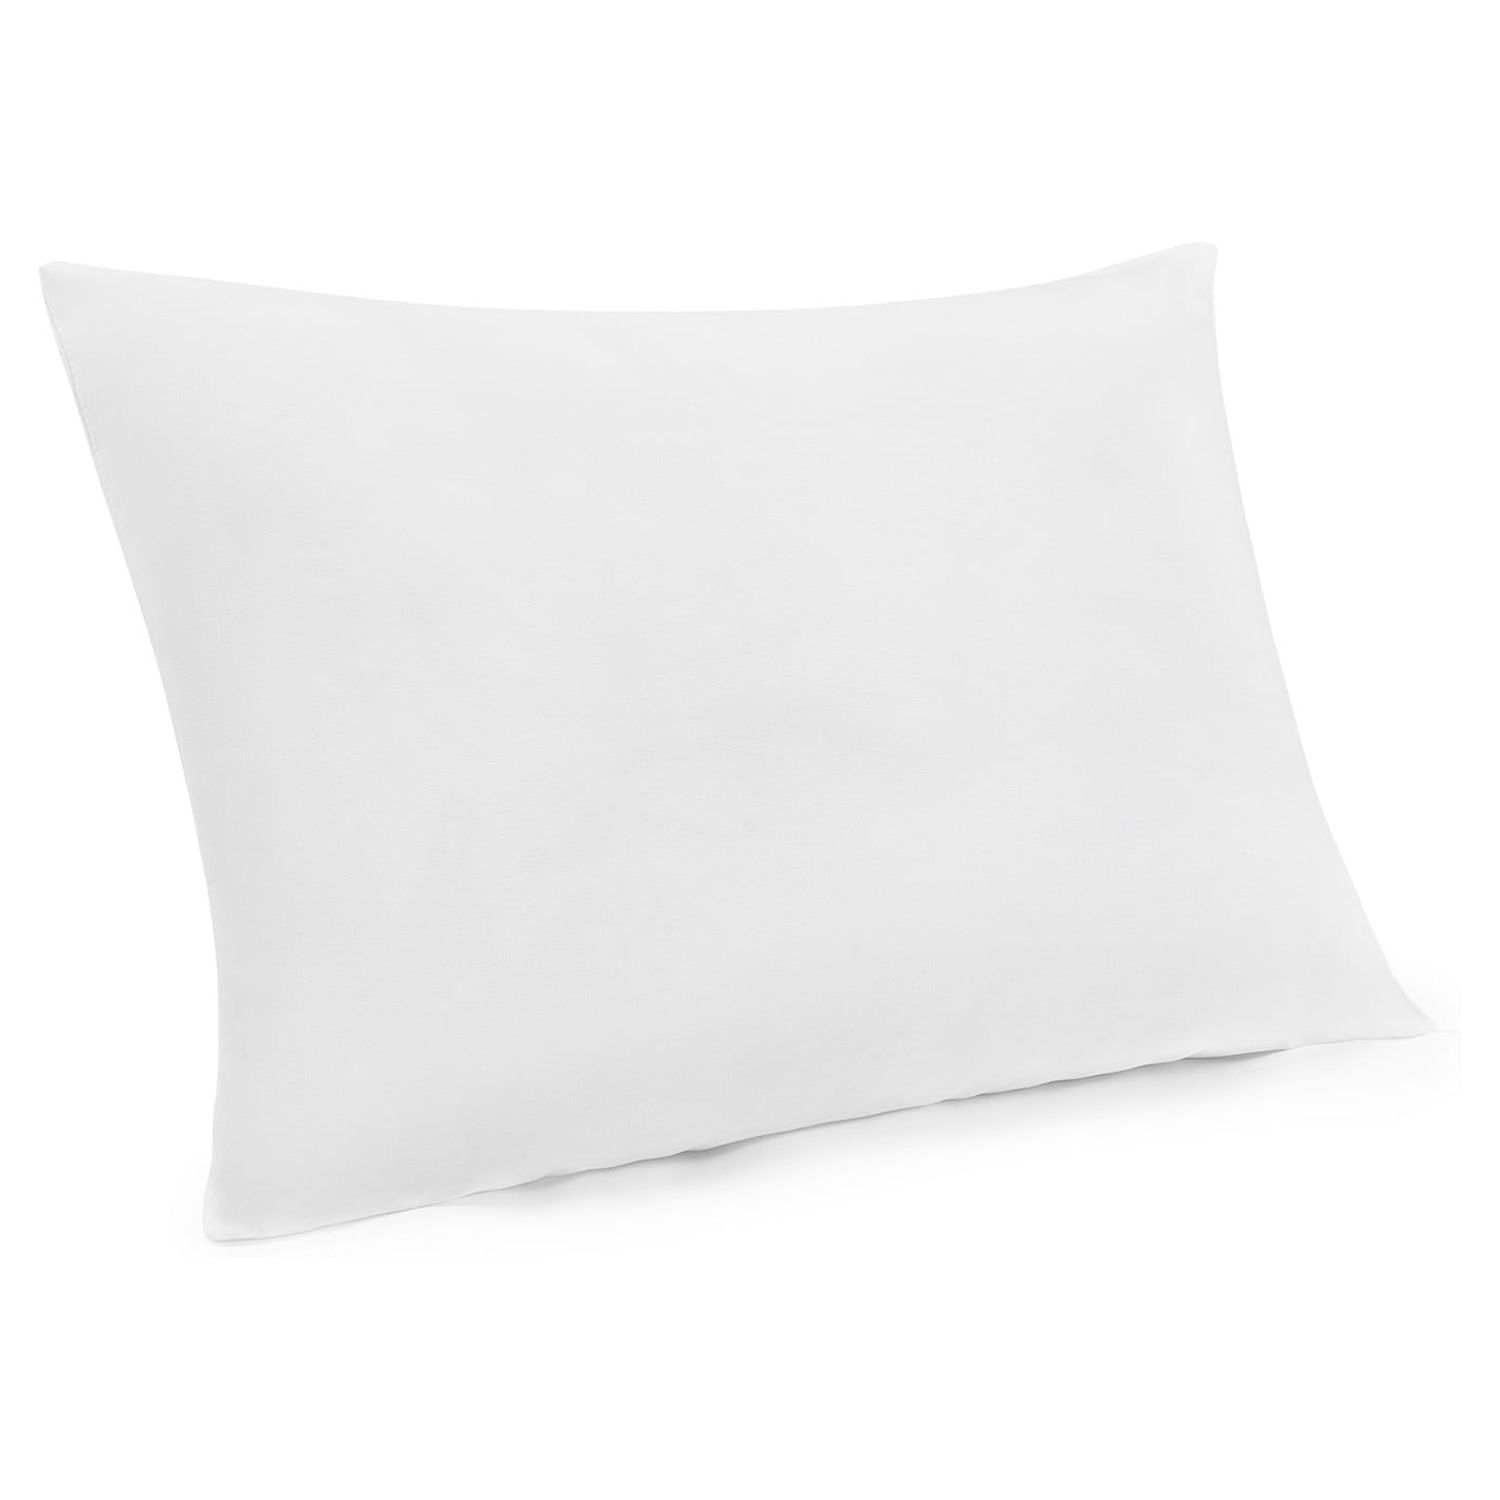 Mainstays Travel Pillow, 14" X 20", 2 Pack - image 3 of 7